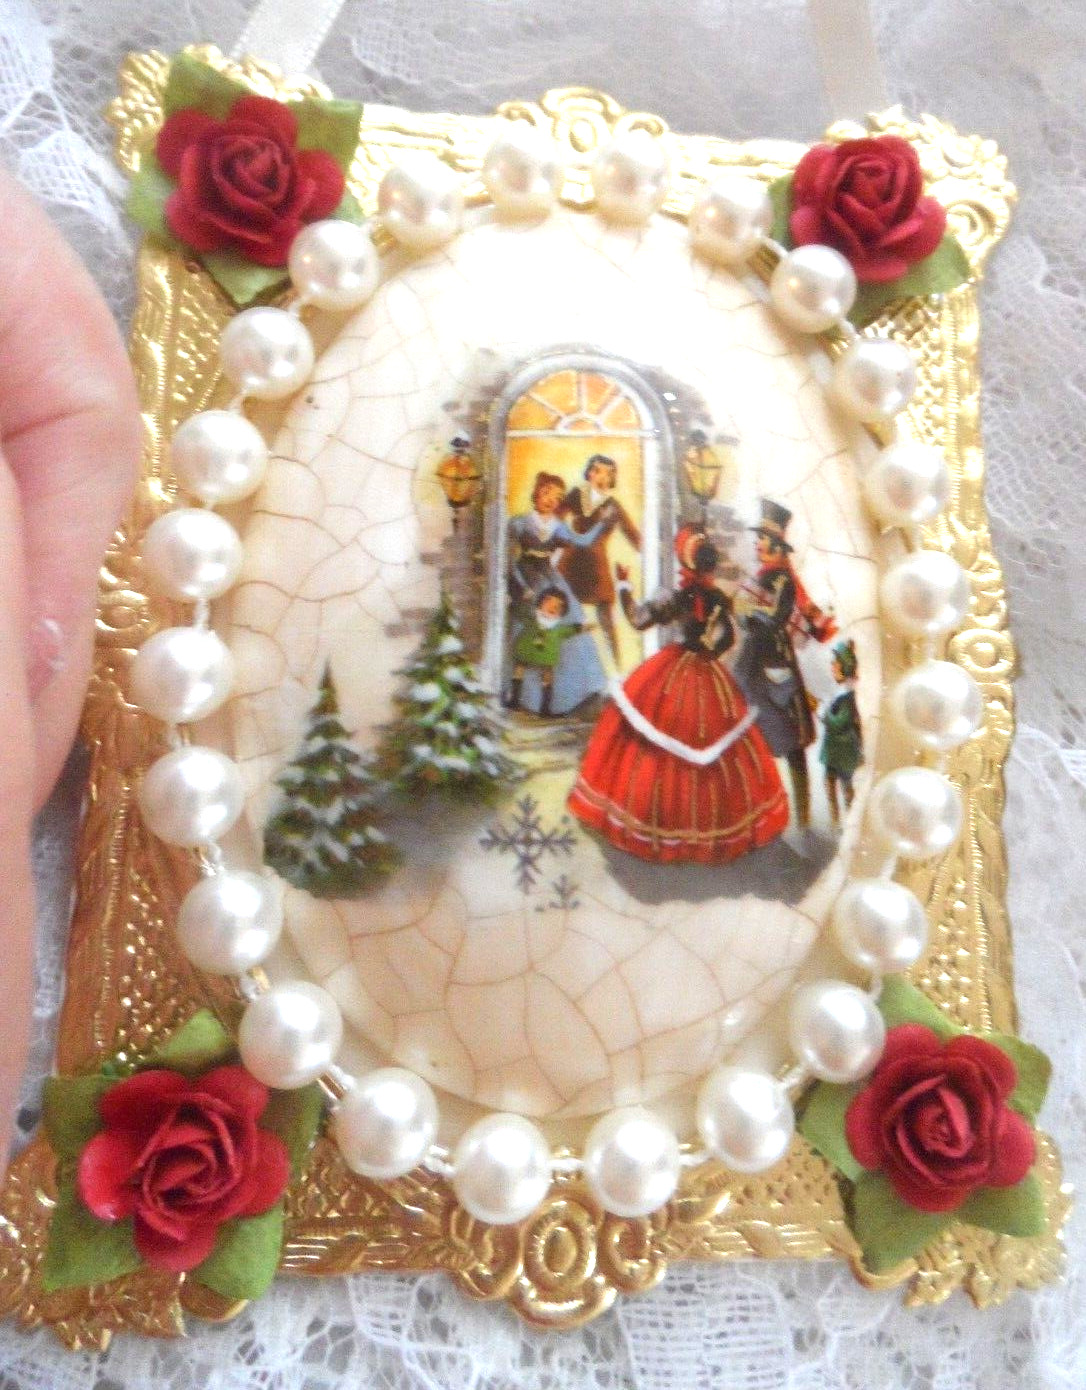 Antique Style Christmas Ornament-HANDMADE VINTAGE IMAGE CERAMIC OVAL w/PEARLS